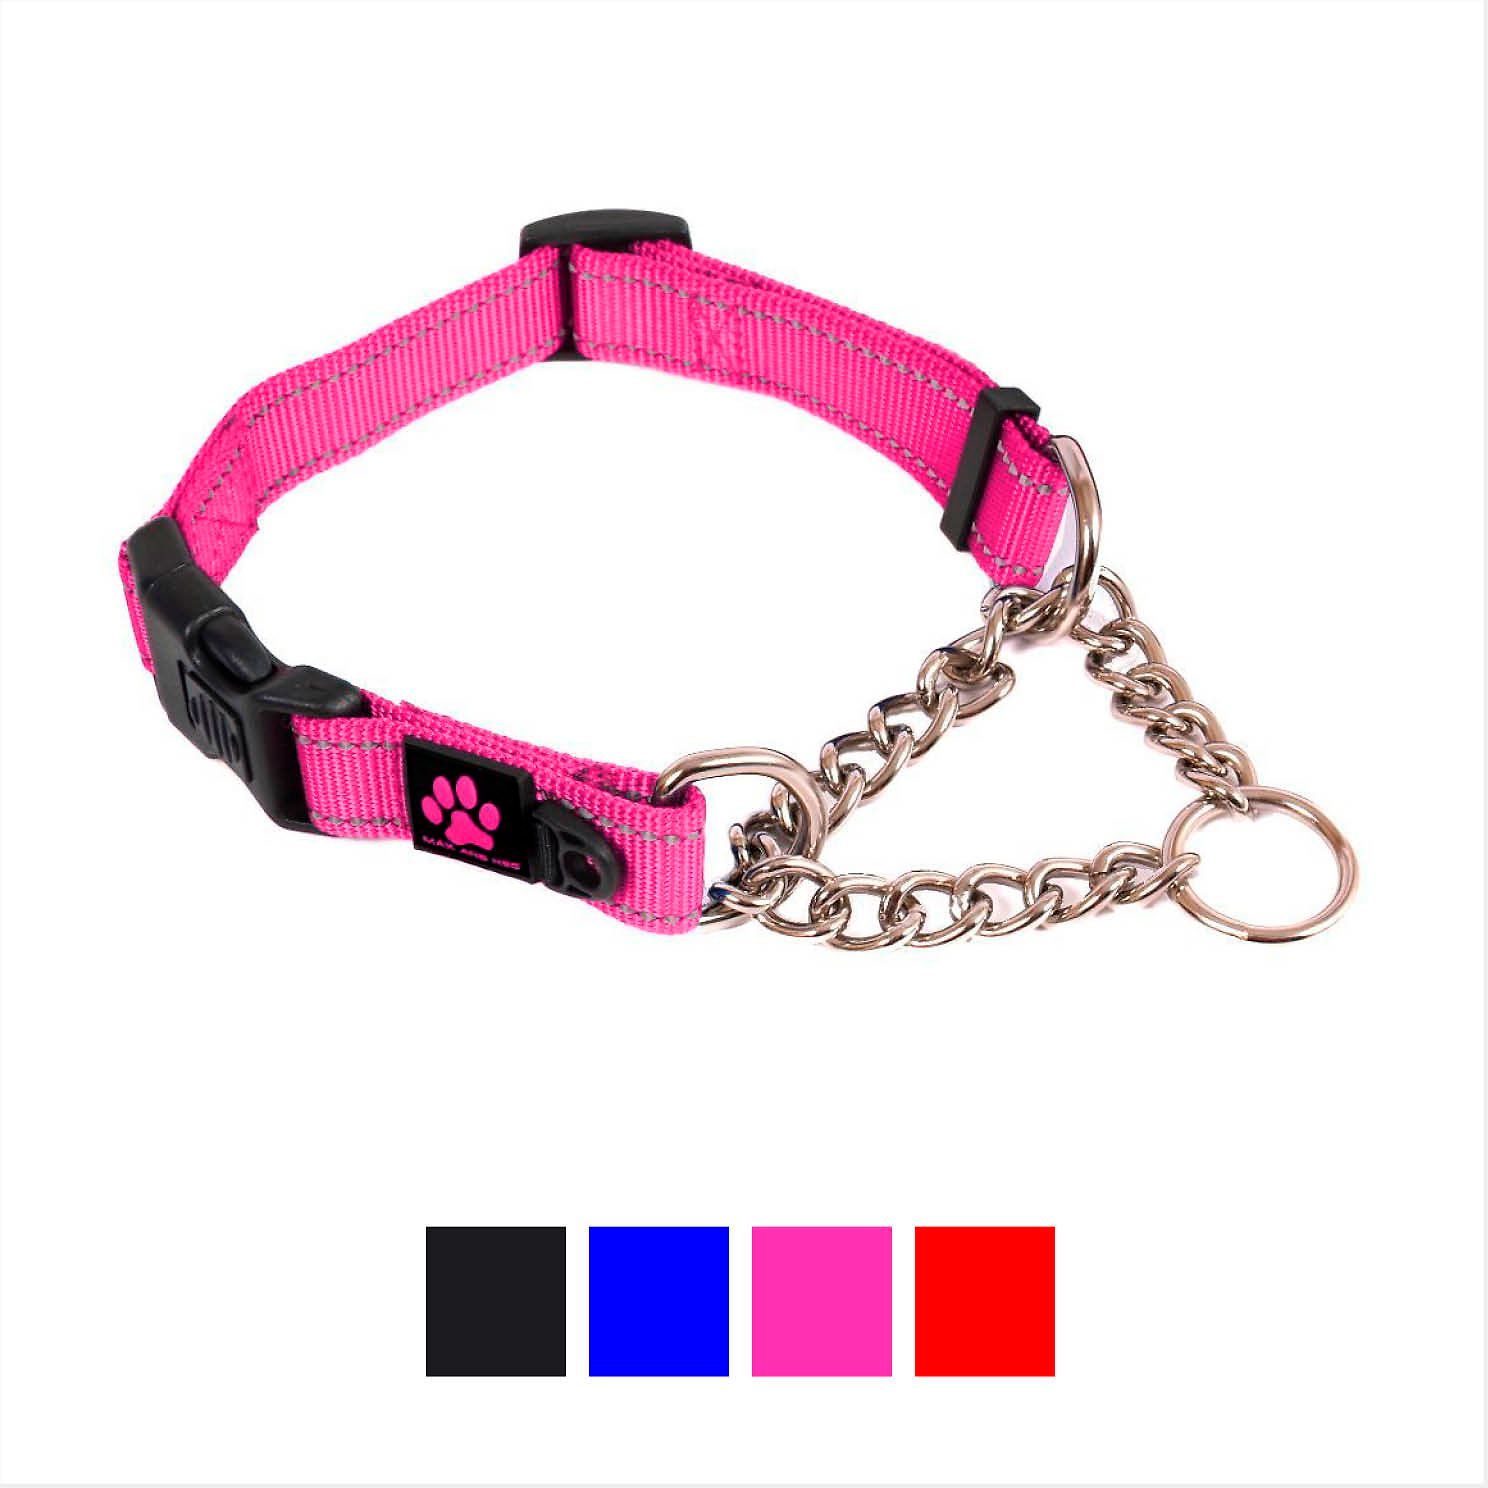 Max and Neo Dog Gear Martingale Dog Collar with Chain.